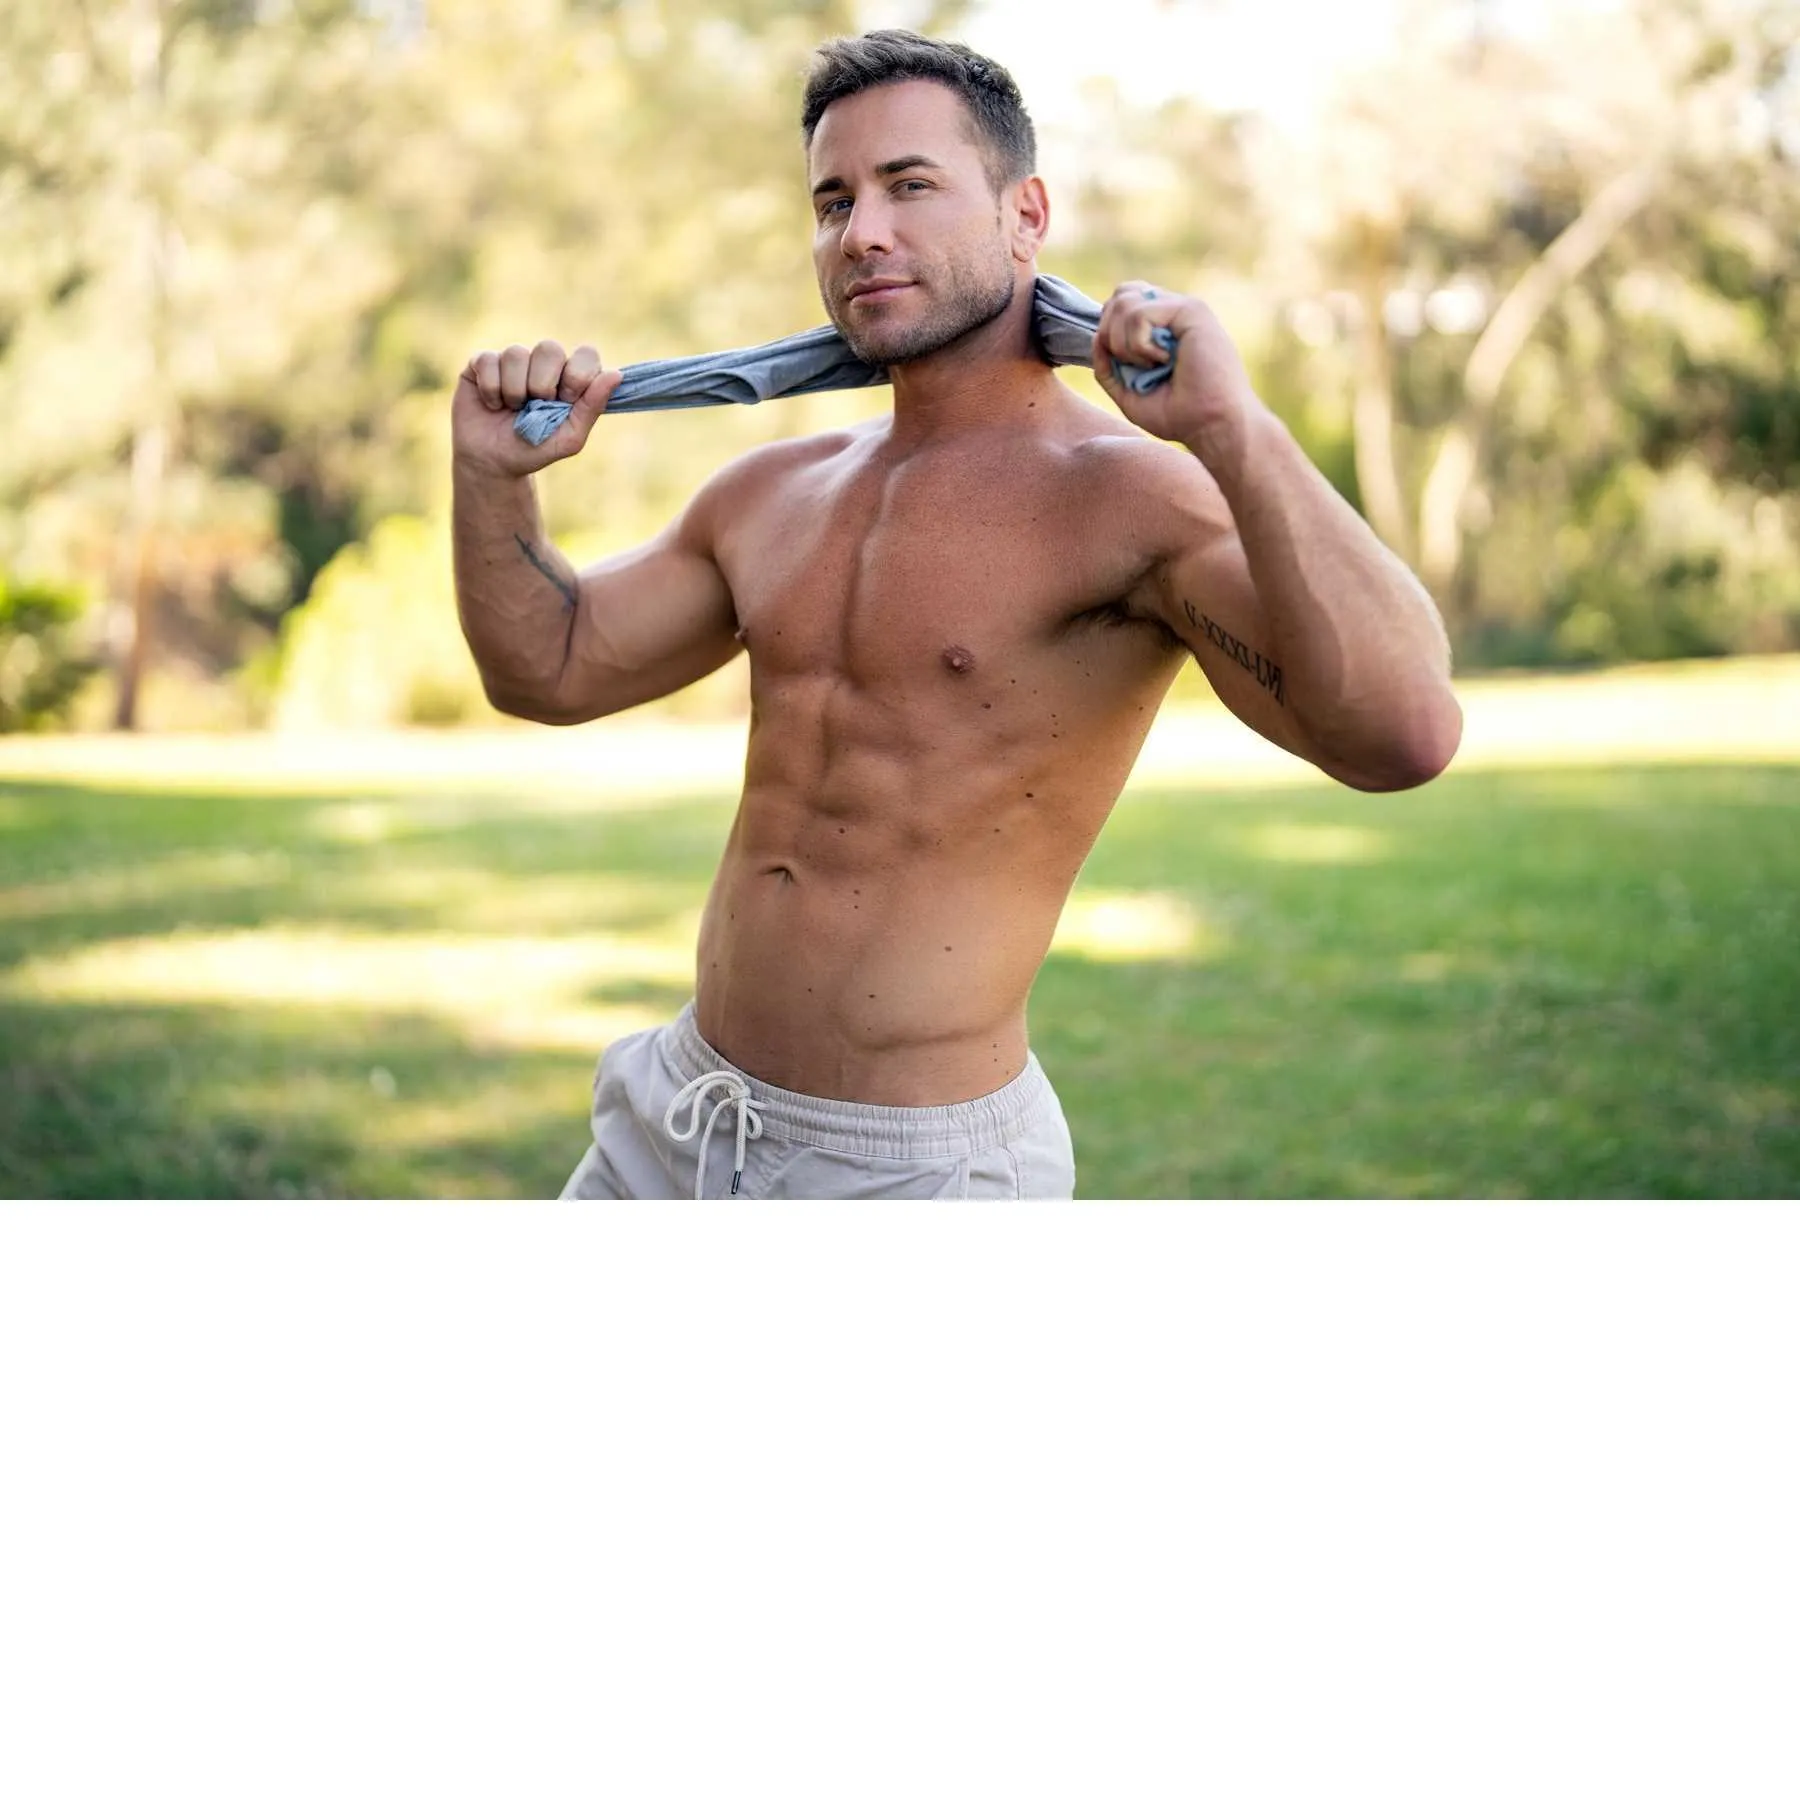 Male posed topless outdoors displaying abs